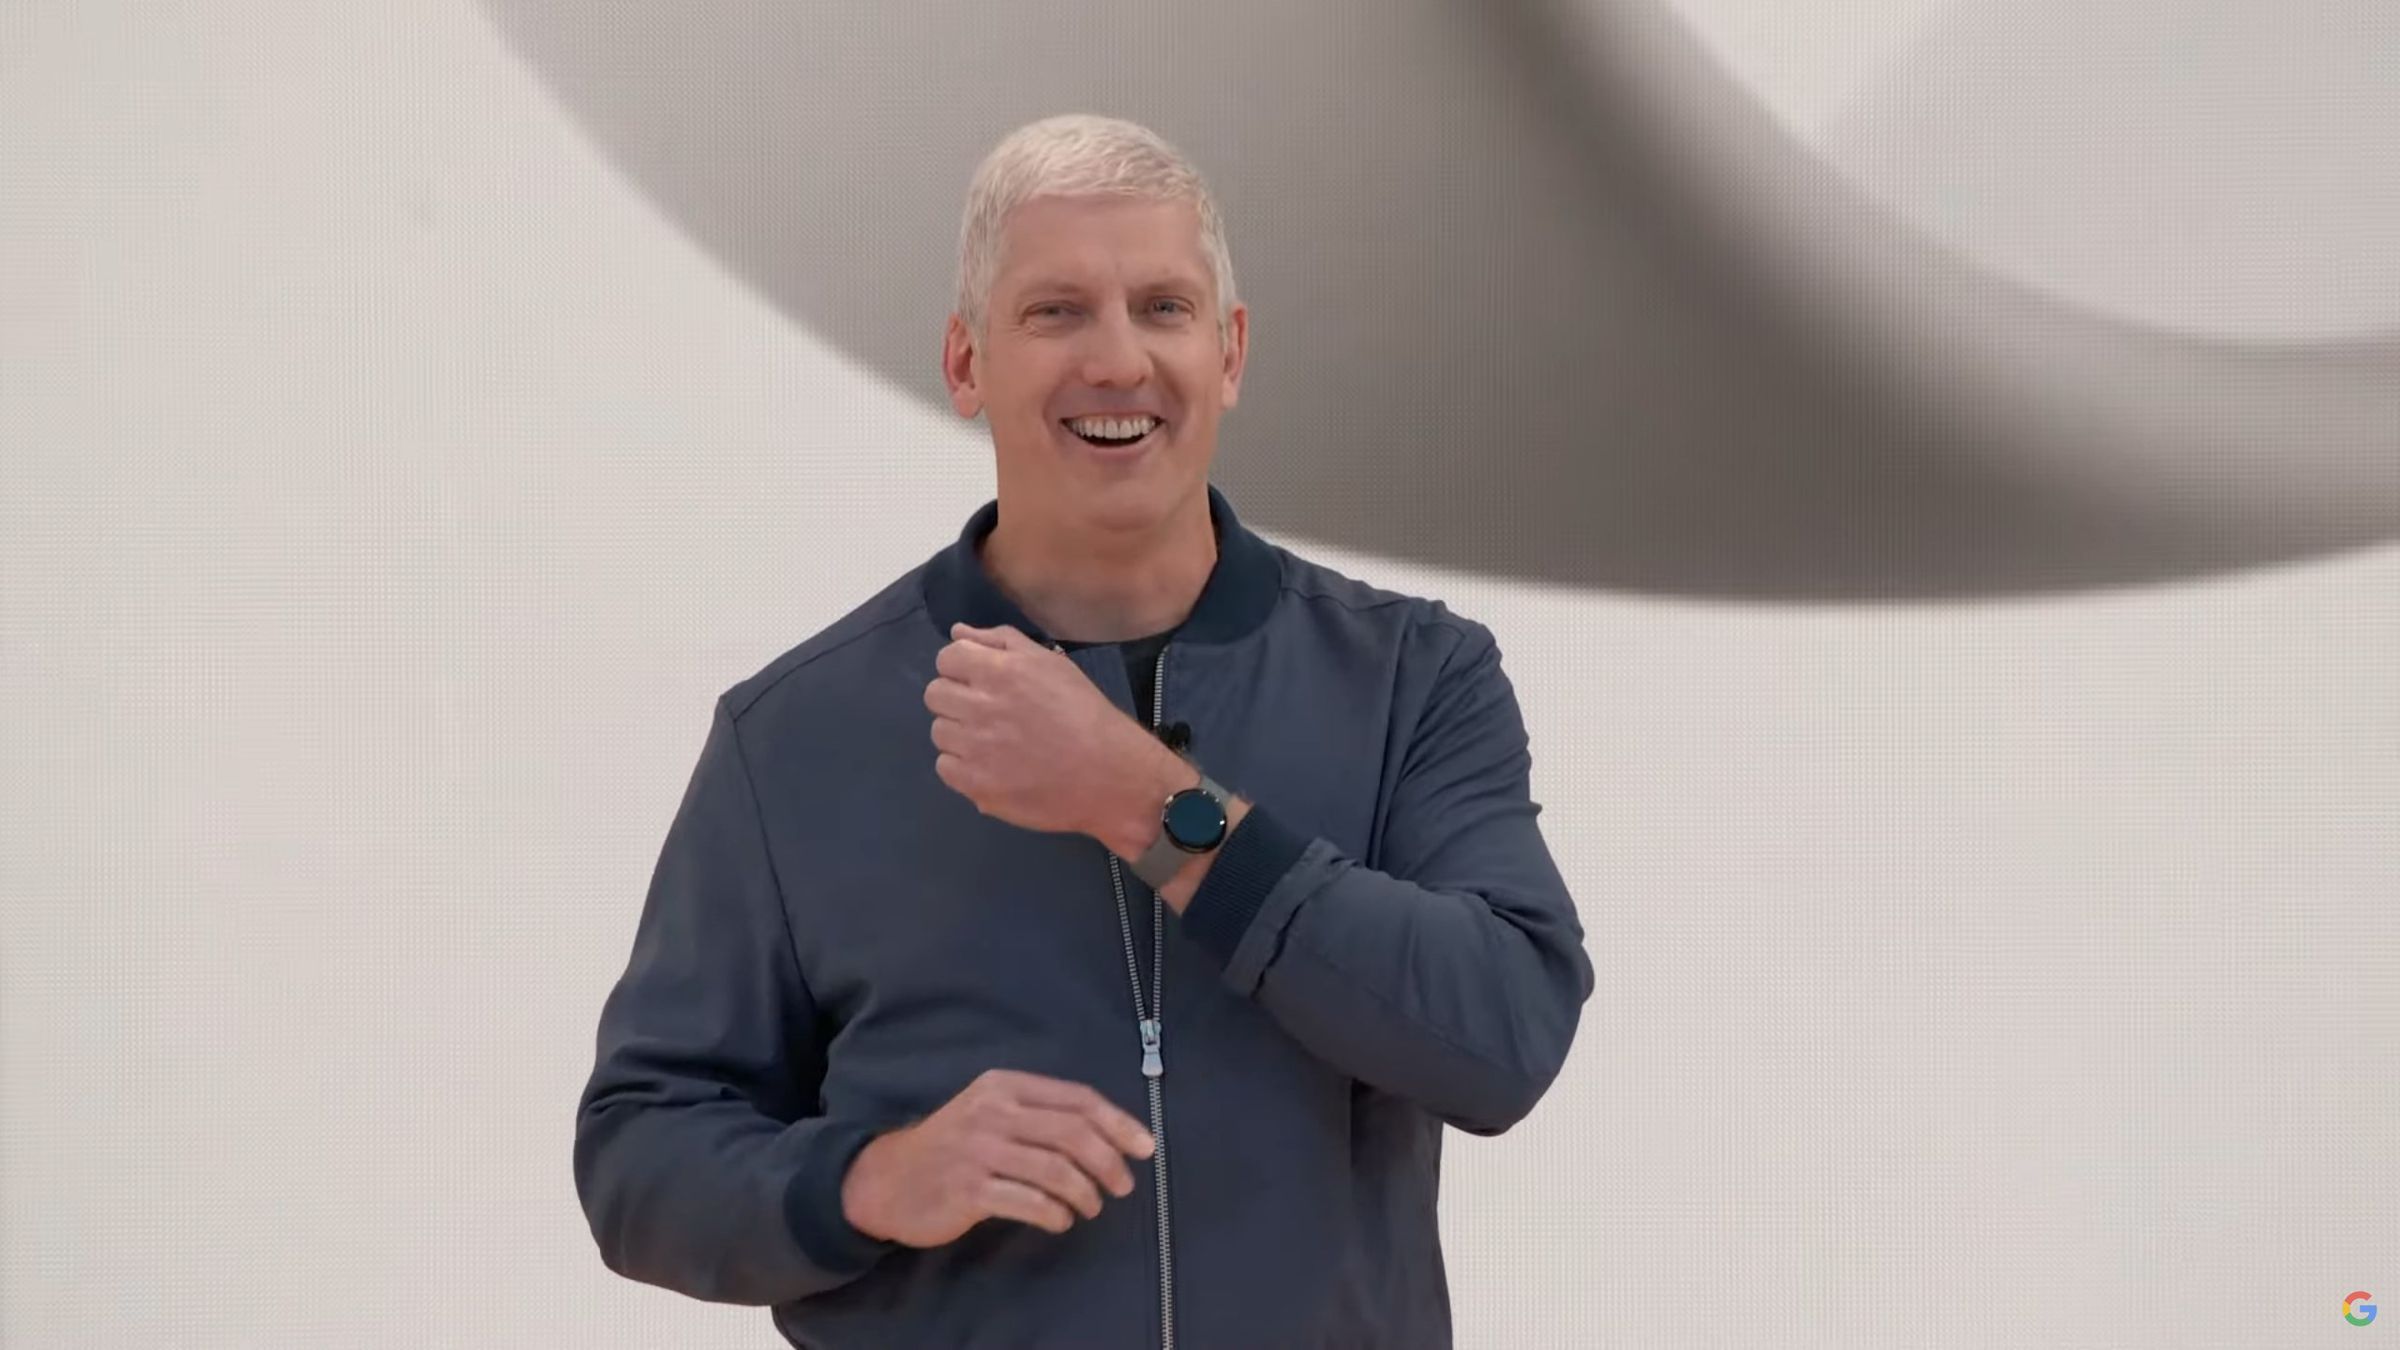 Rick Osterloh showing off the Pixel Watch onstage.